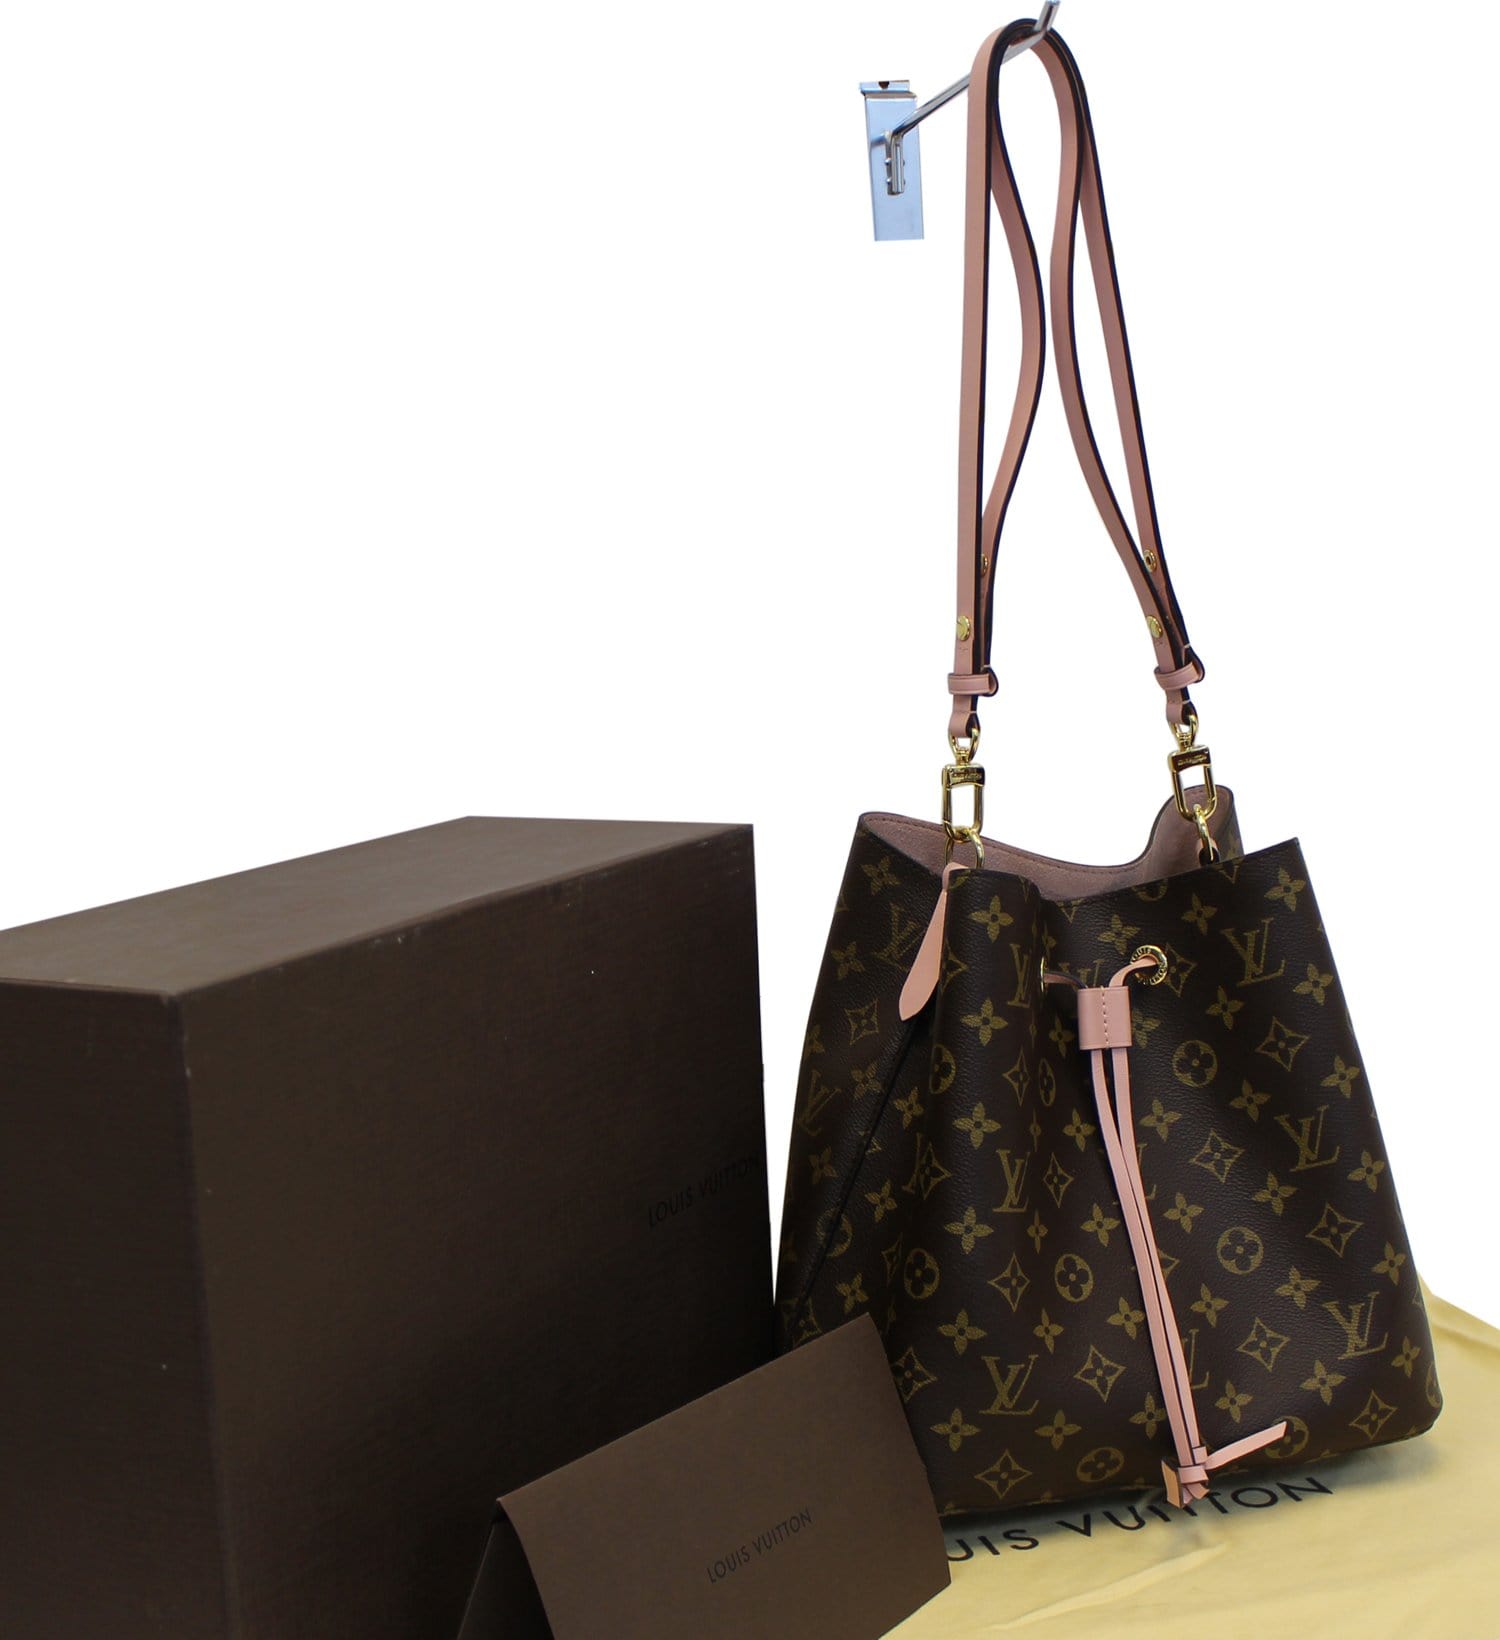 Excellent LV neo noe rose ballerina with db, booklet box. Price